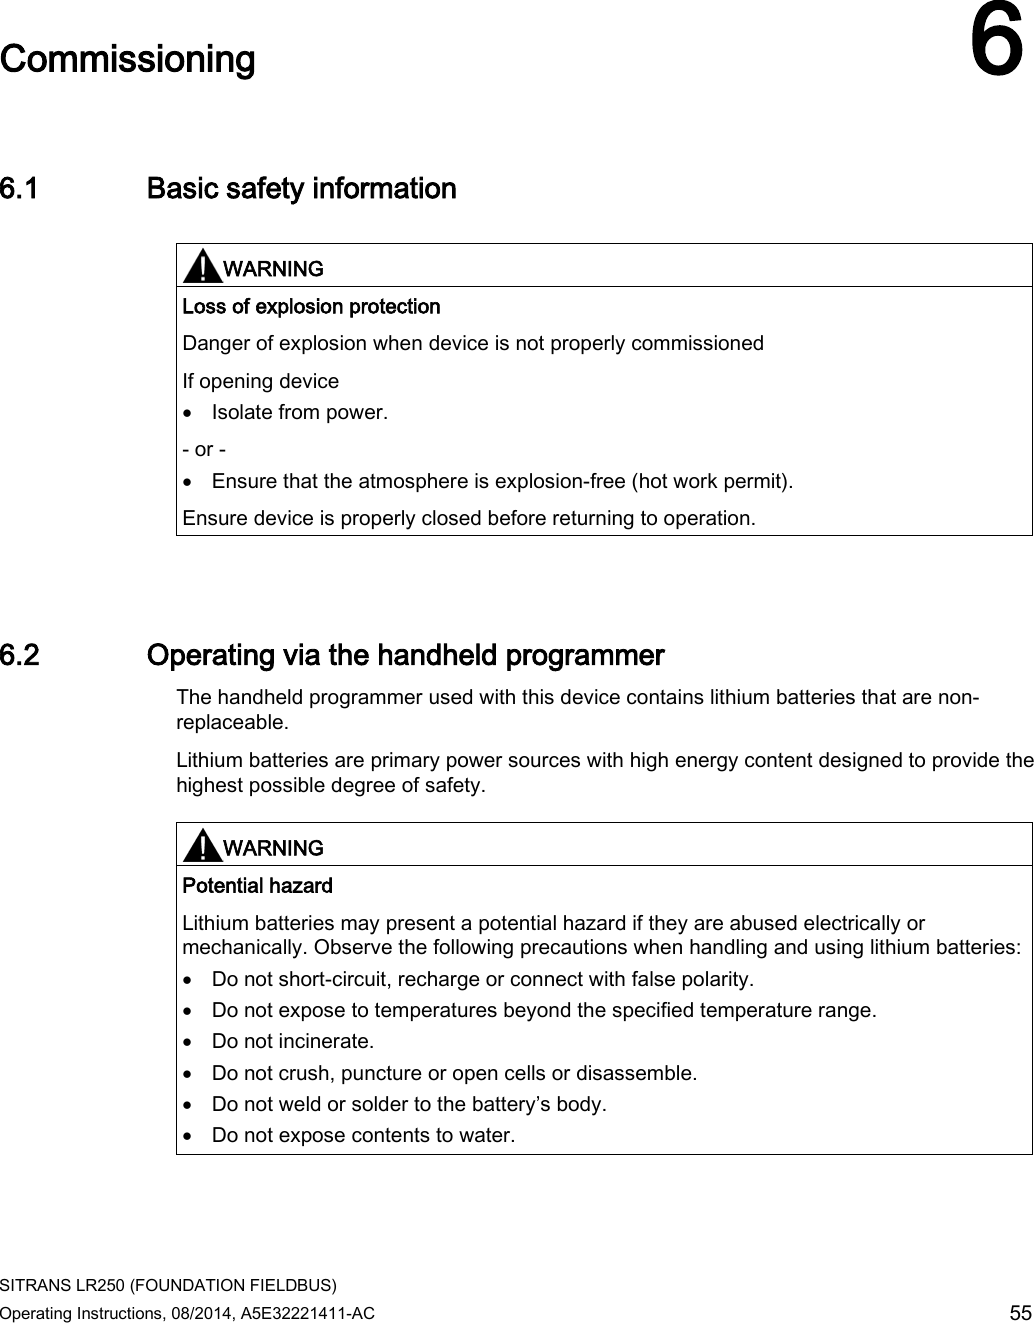  SITRANS LR250 (FOUNDATION FIELDBUS) Operating Instructions, 08/2014, A5E32221411-AC 55  Commissioning 6 6.1 Basic safety information   WARNING Loss of explosion protection Danger of explosion when device is not properly commissioned If opening device • Isolate from power. - or - • Ensure that the atmosphere is explosion-free (hot work permit). Ensure device is properly closed before returning to operation.  6.2 Operating via the handheld programmer The handheld programmer used with this device contains lithium batteries that are non-replaceable. Lithium batteries are primary power sources with high energy content designed to provide the highest possible degree of safety.    WARNING Potential hazard Lithium batteries may present a potential hazard if they are abused electrically or mechanically. Observe the following precautions when handling and using lithium batteries: • Do not short-circuit, recharge or connect with false polarity. • Do not expose to temperatures beyond the specified temperature range. • Do not incinerate. • Do not crush, puncture or open cells or disassemble. • Do not weld or solder to the battery’s body. • Do not expose contents to water.  